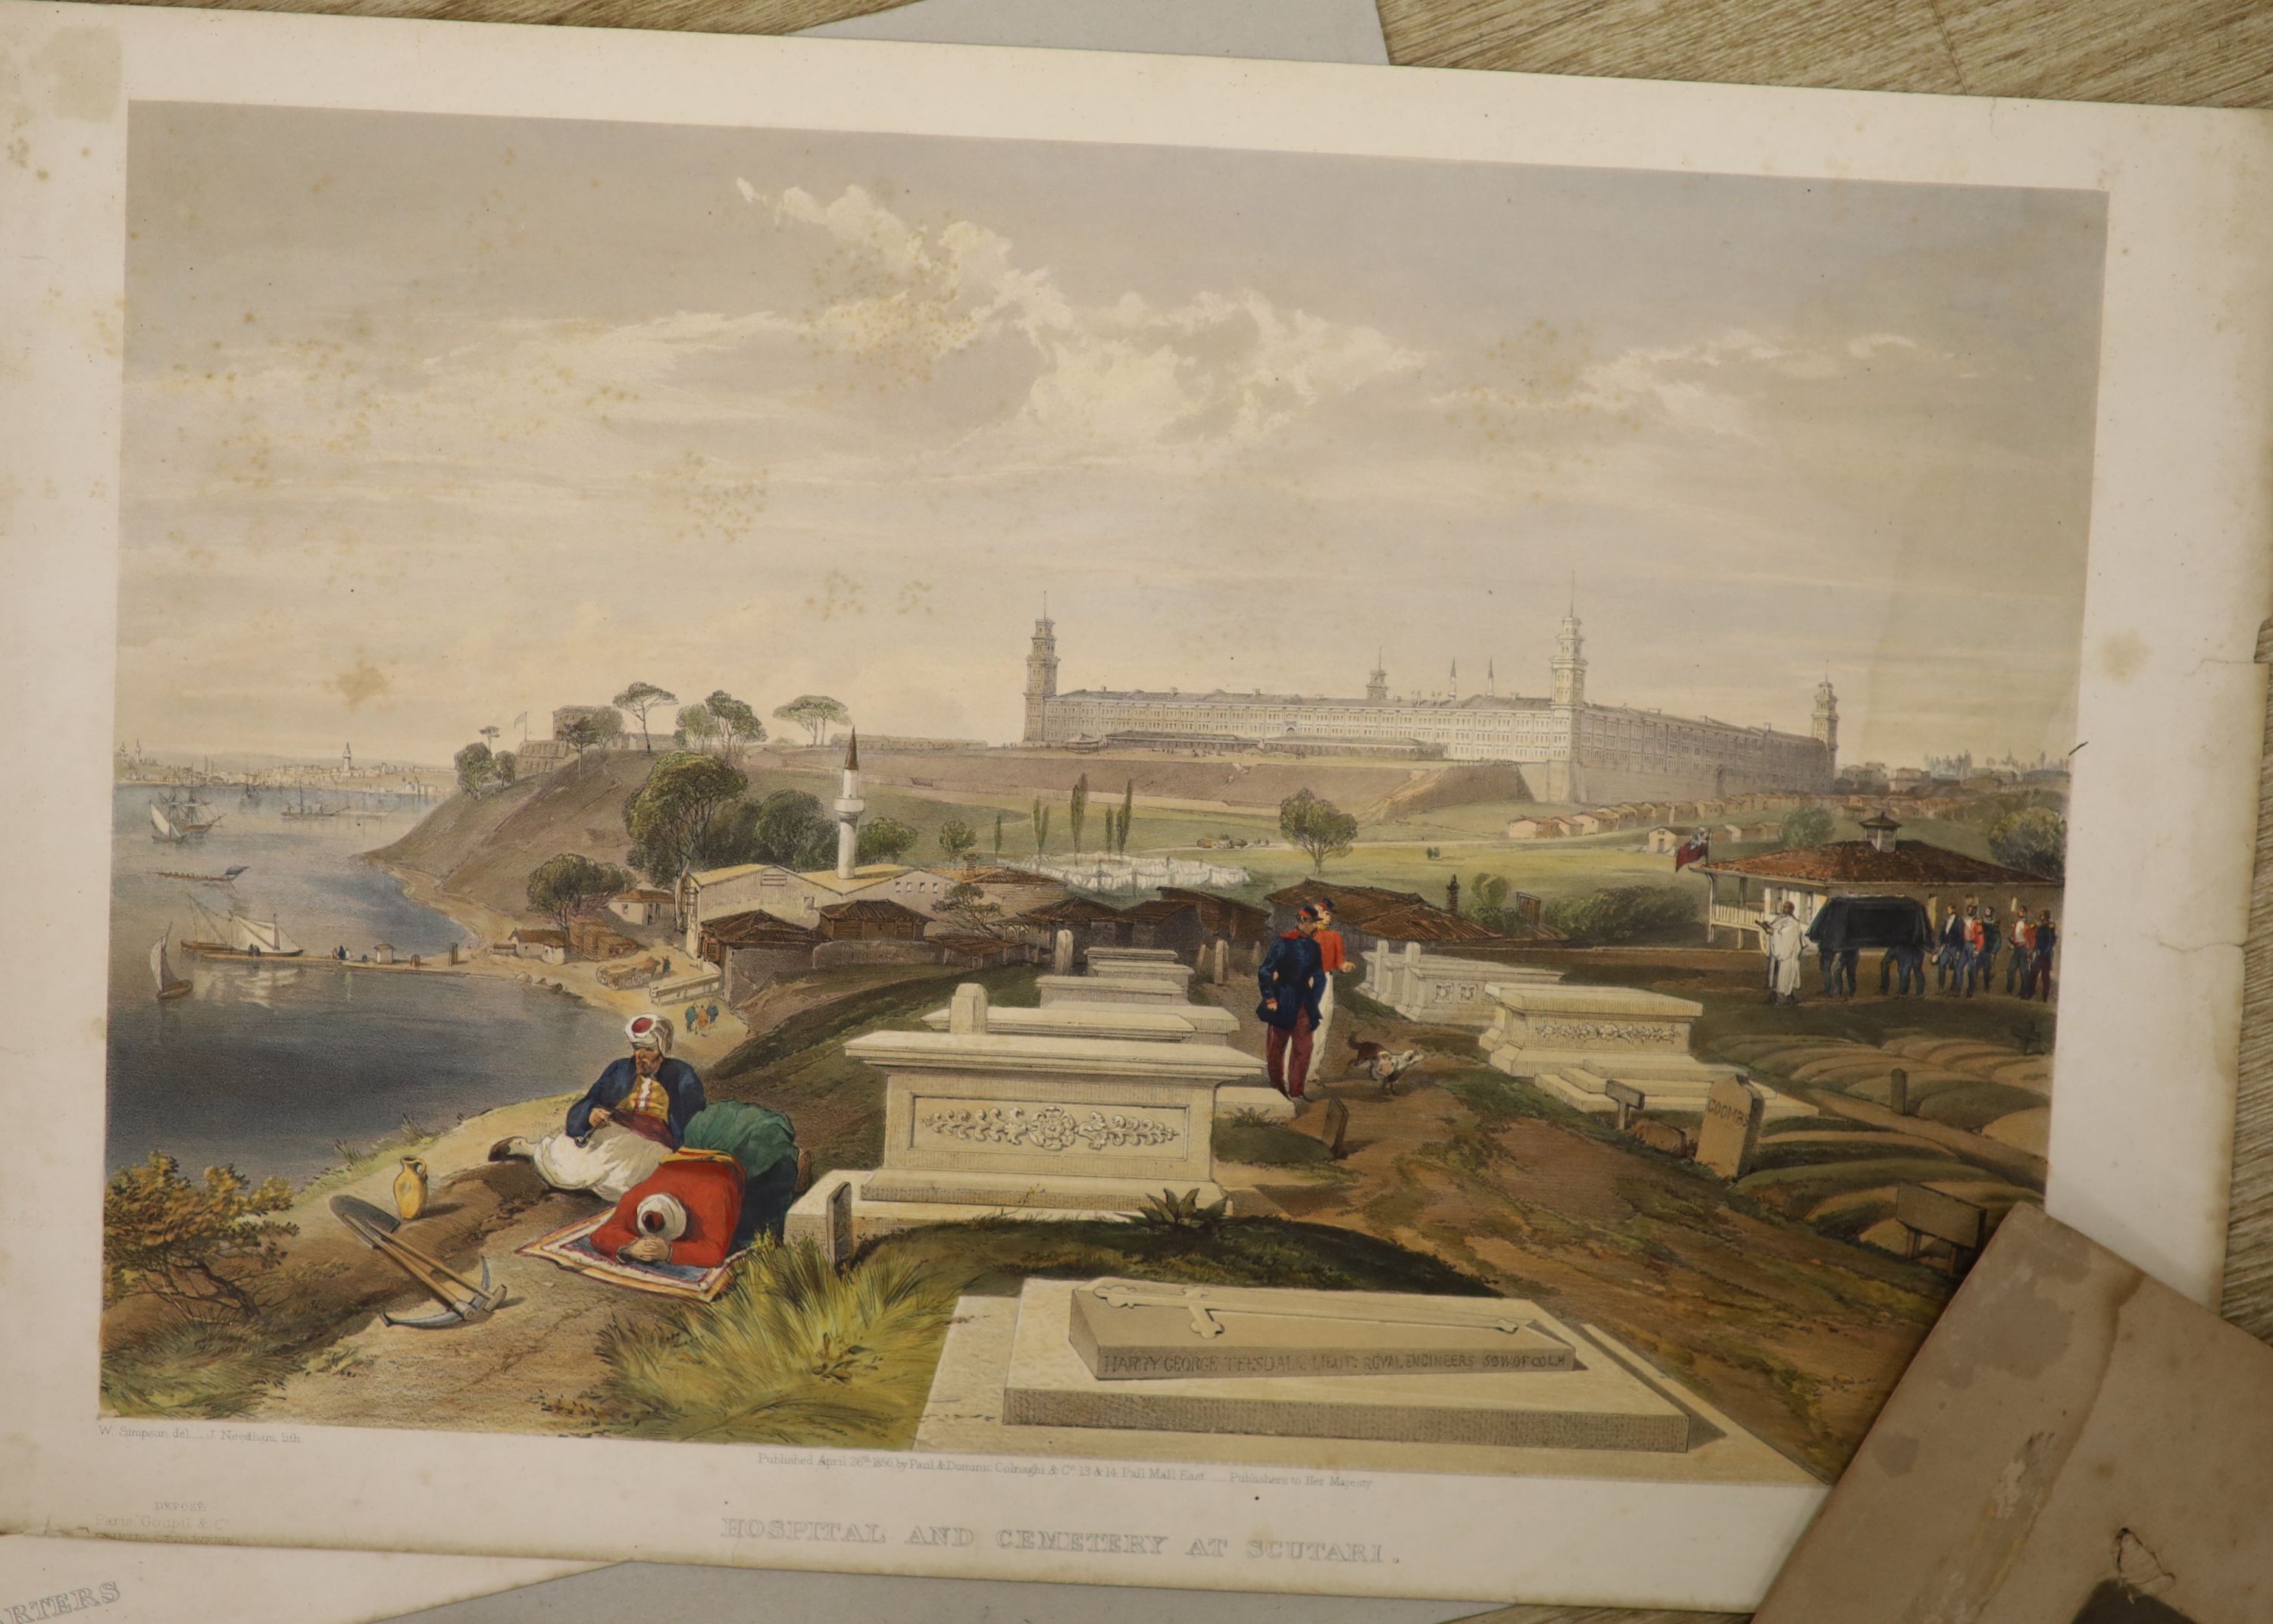 After W. Simpson, two coloured lithographs, Interior of Lord Raglands Headquarters and Hospital and Cemetery at Scutari, 36 x 45cm, with two other prints and a watercolour by Percy Hamilton, unframed